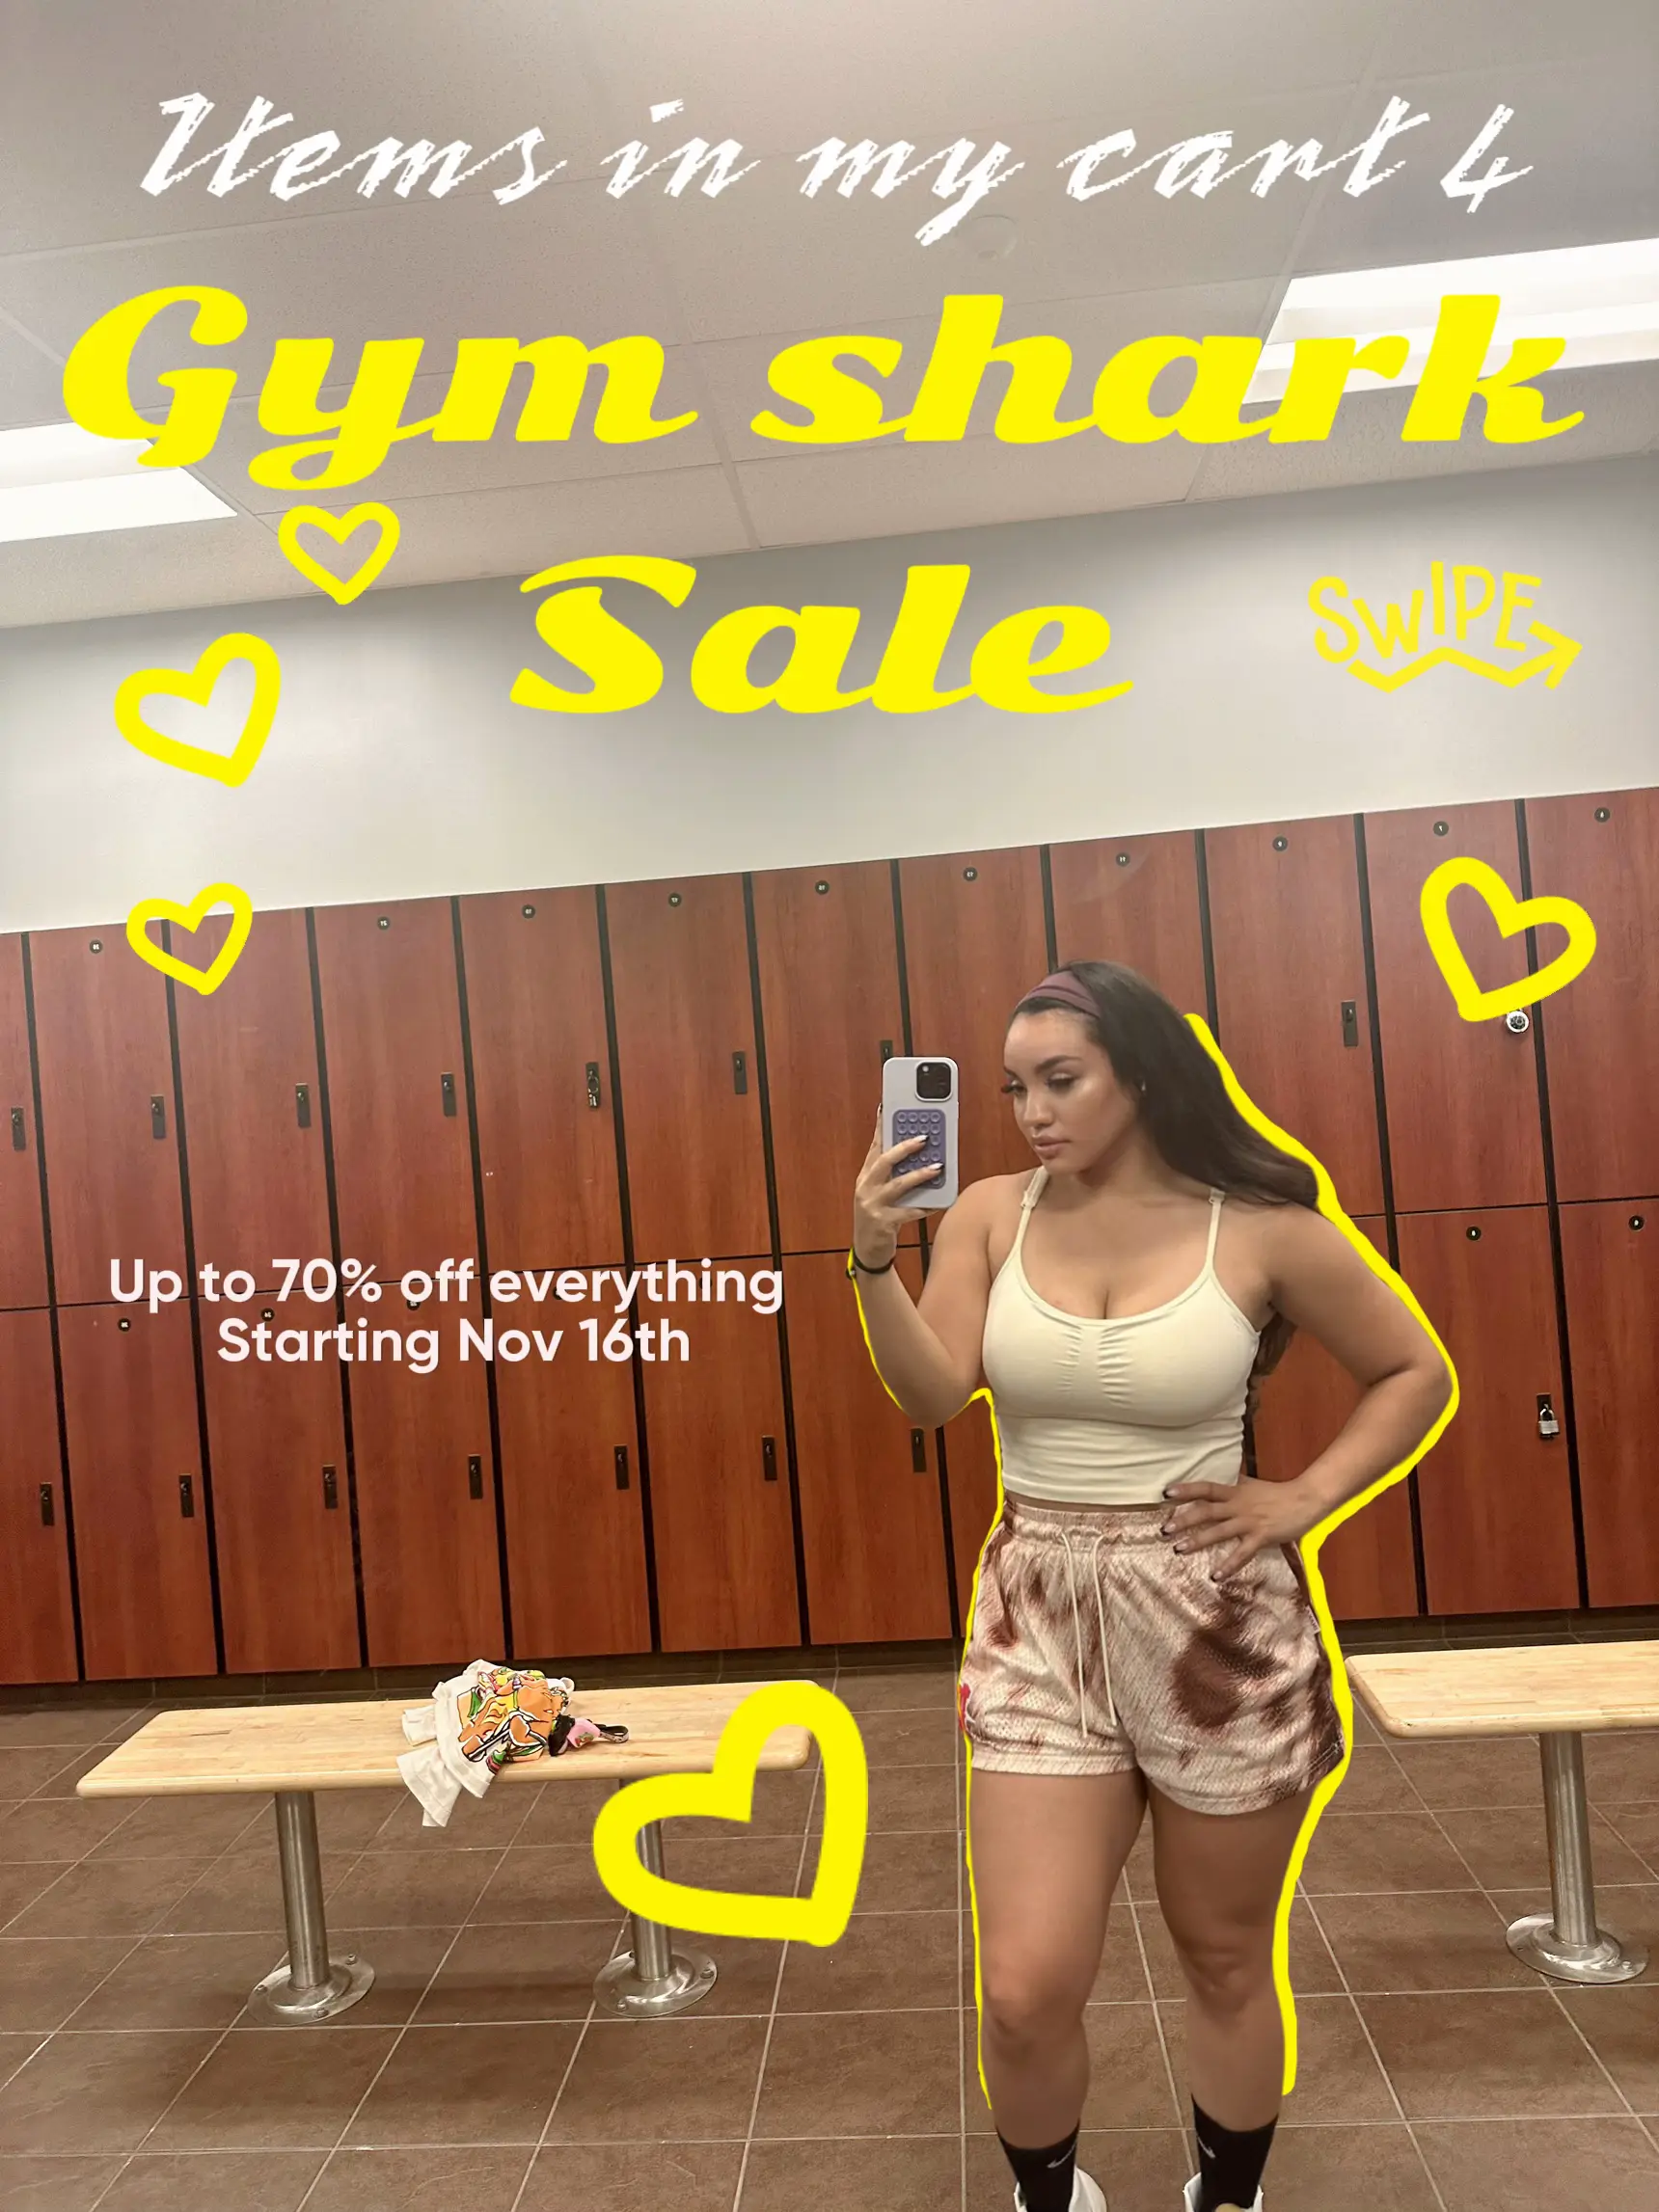 GYMSHARK NEWNESS 🦈 here's how to get 10% off anything and